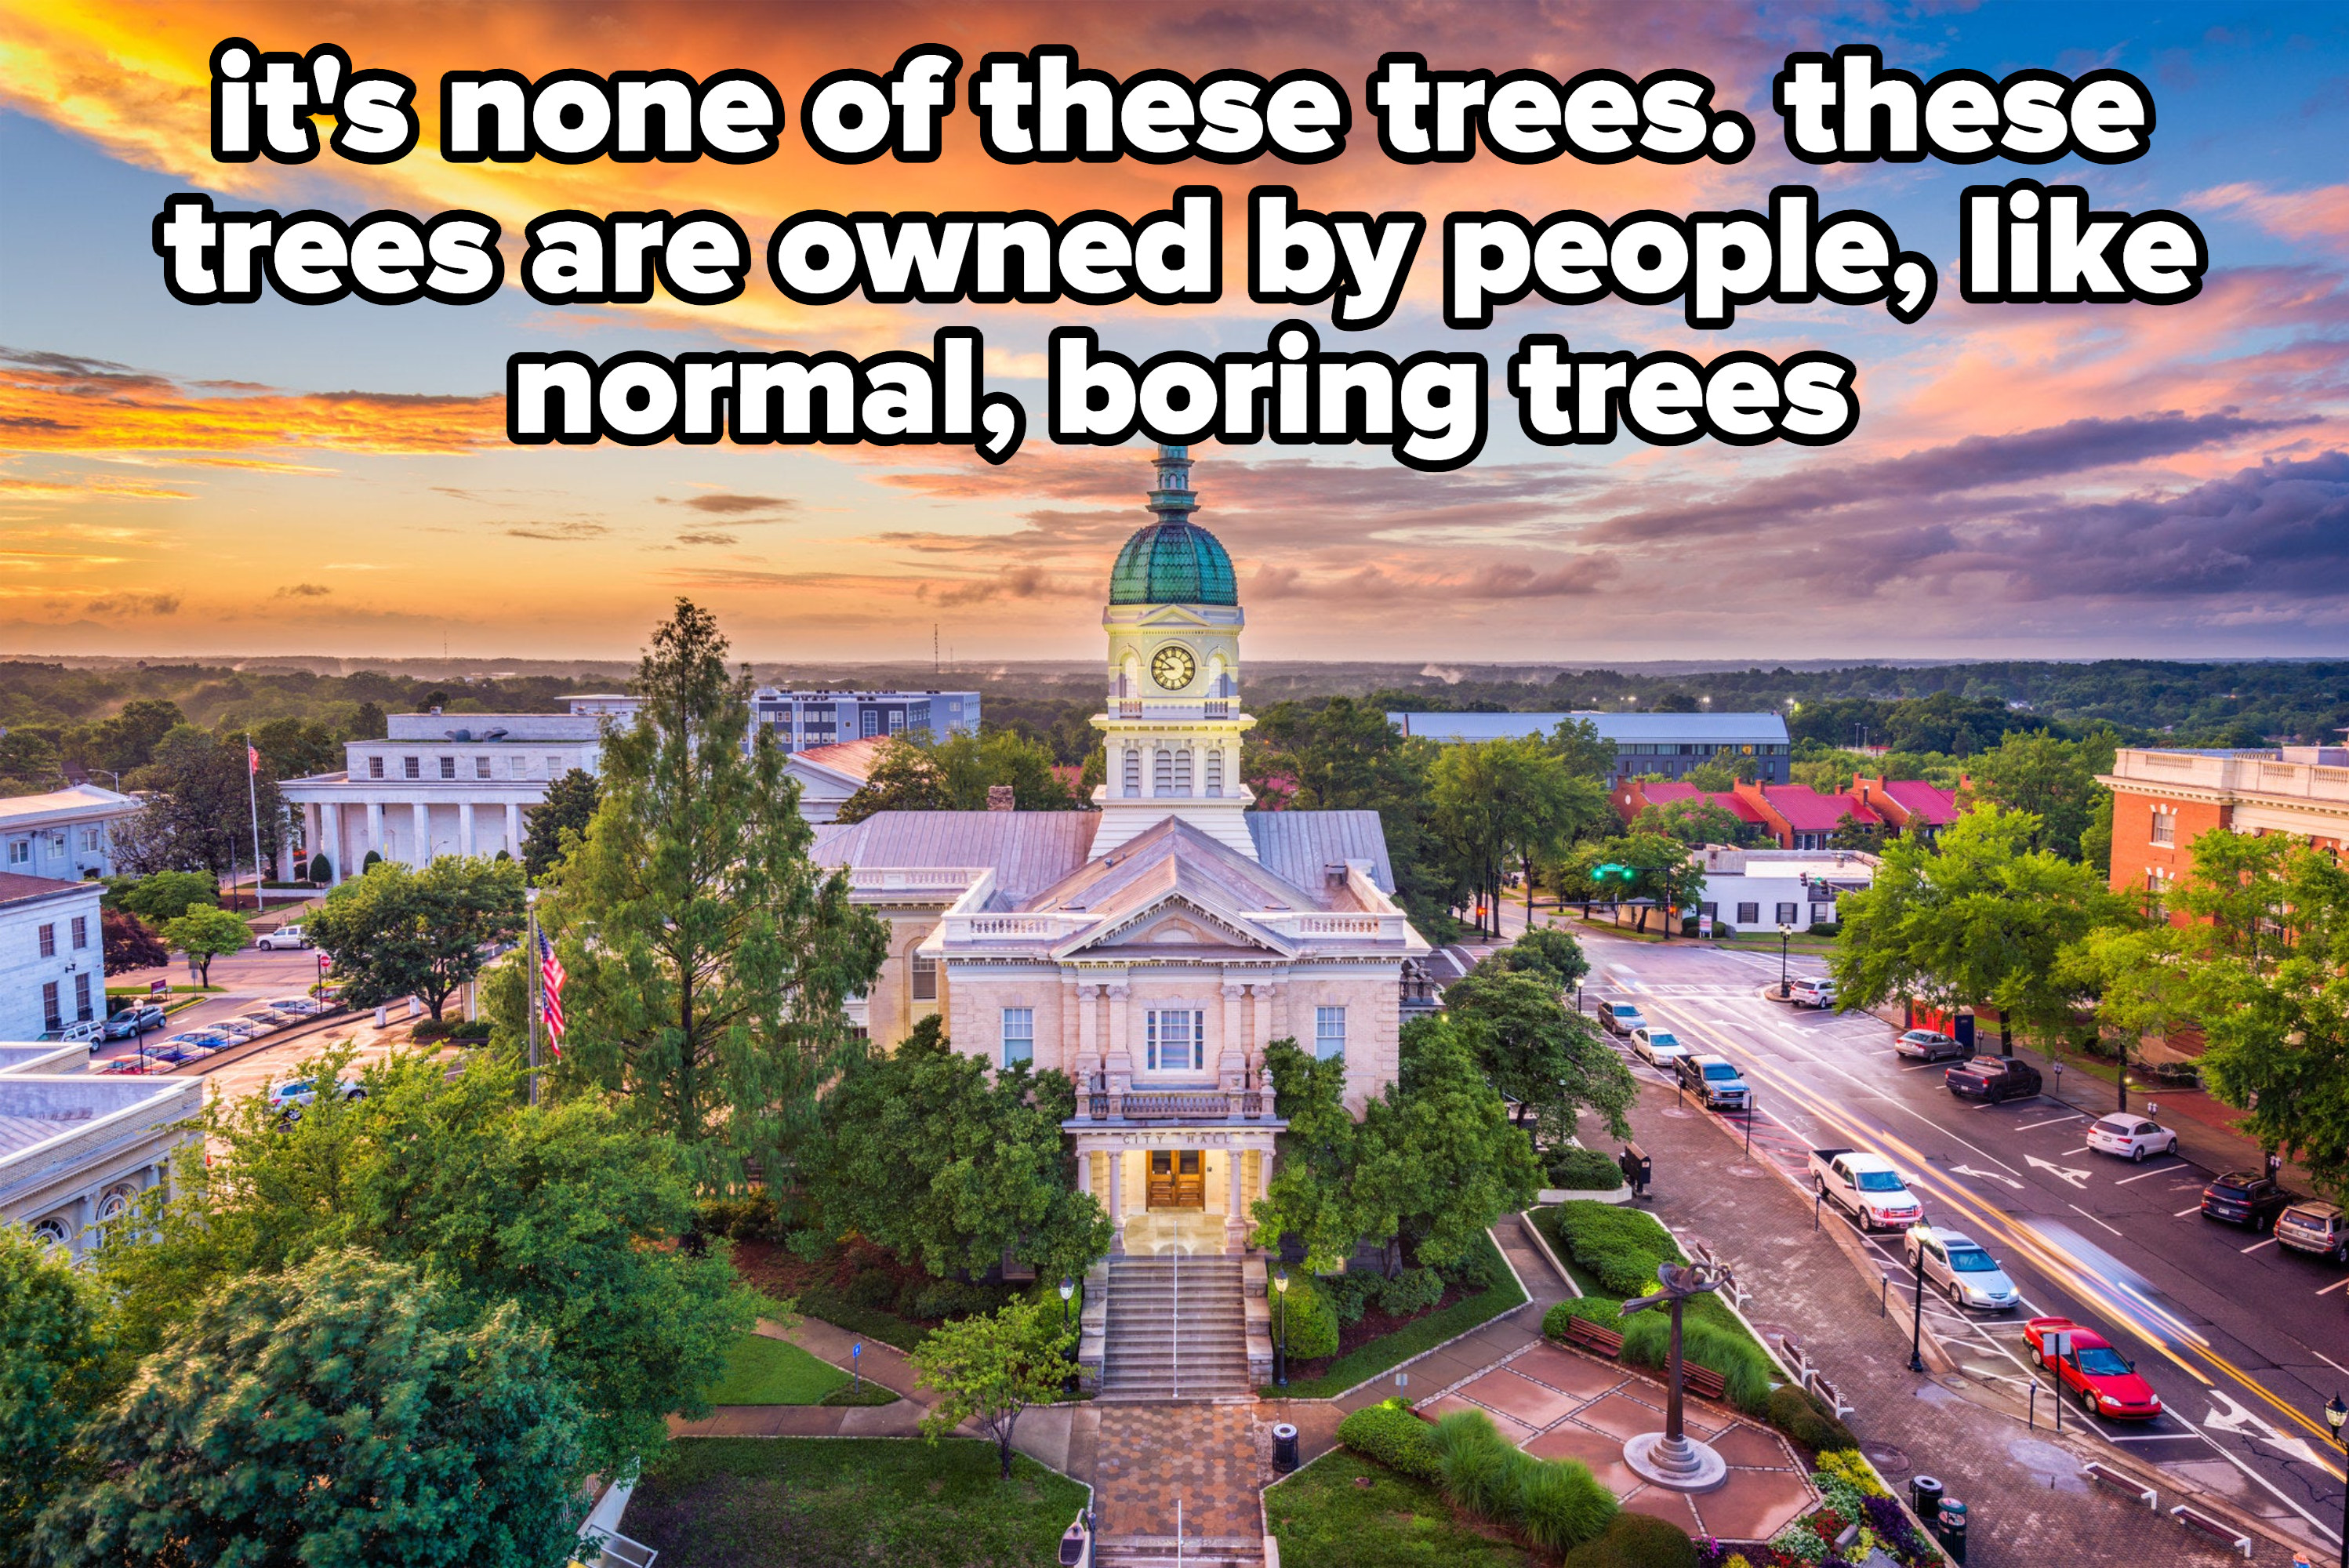 the city hall of Athens, Georgia, surrounded by trees, with caption: it&#x27;s none of these trees. these trees are owned by people, like normal, boring trees